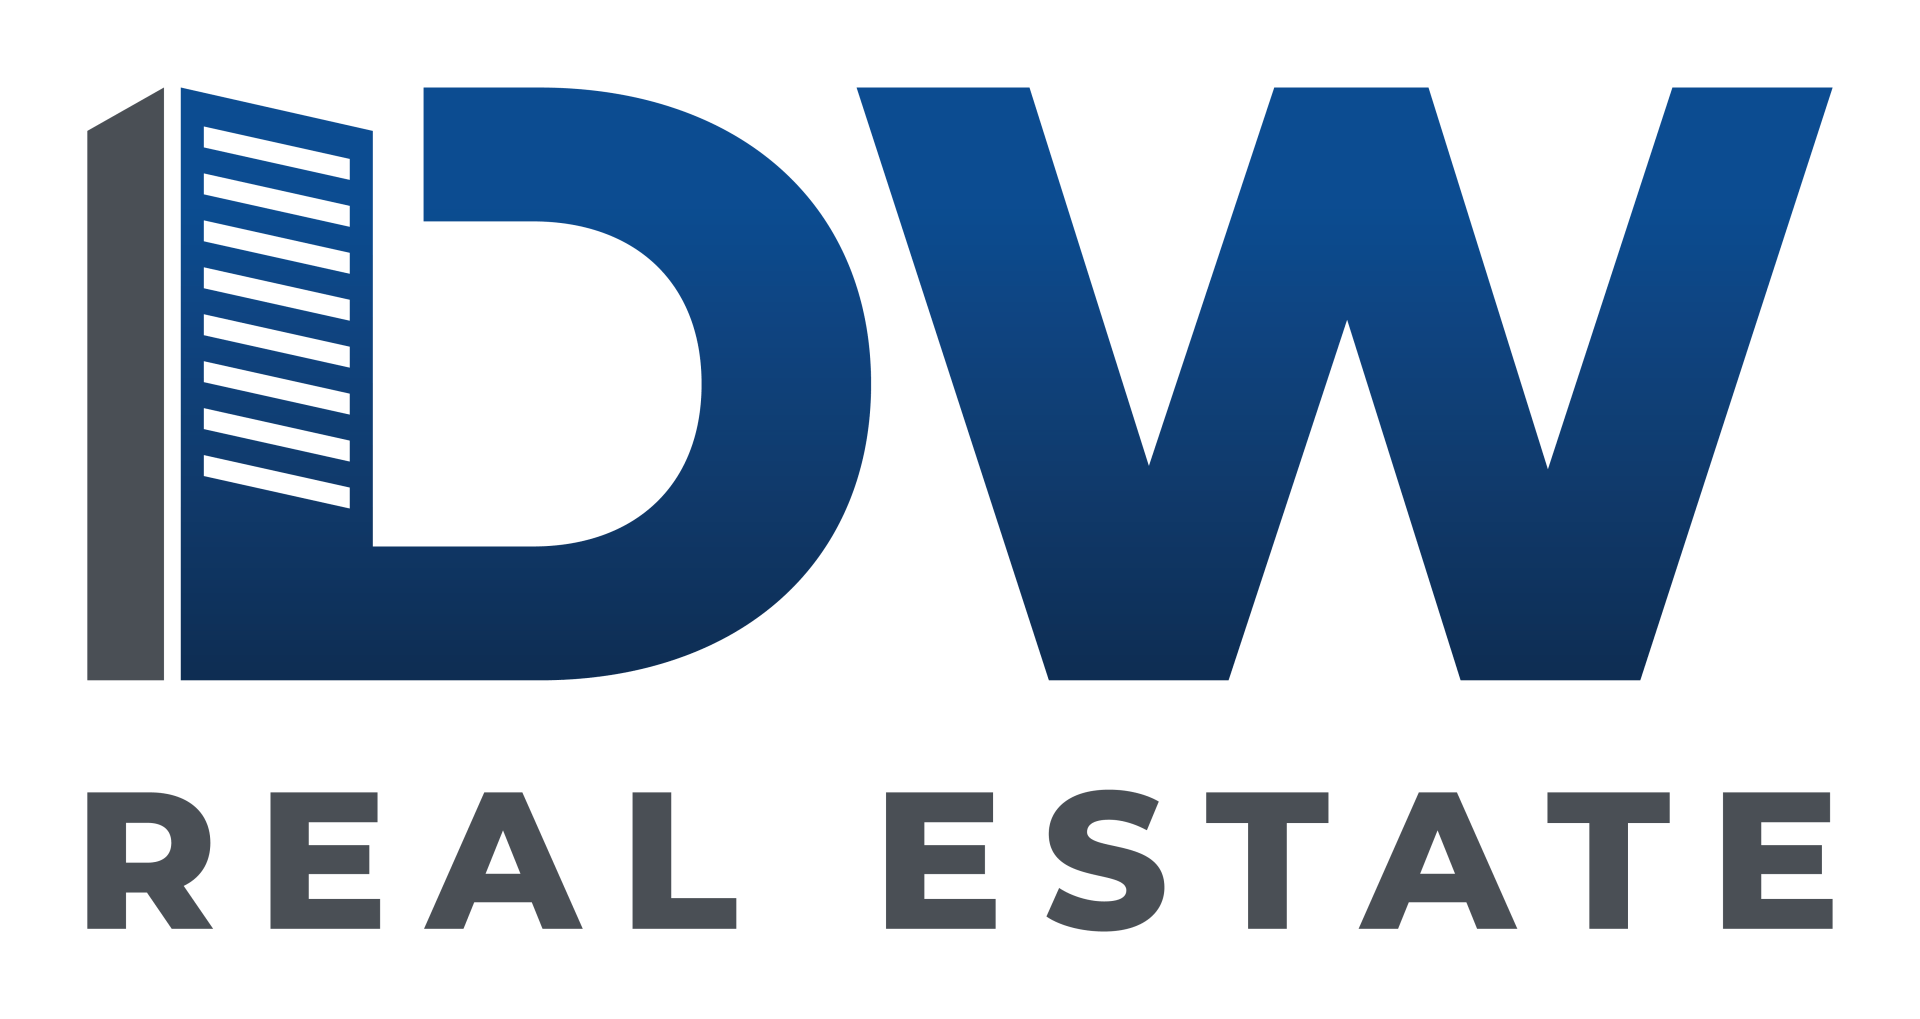 DW Property & Real Estate Management Home Page